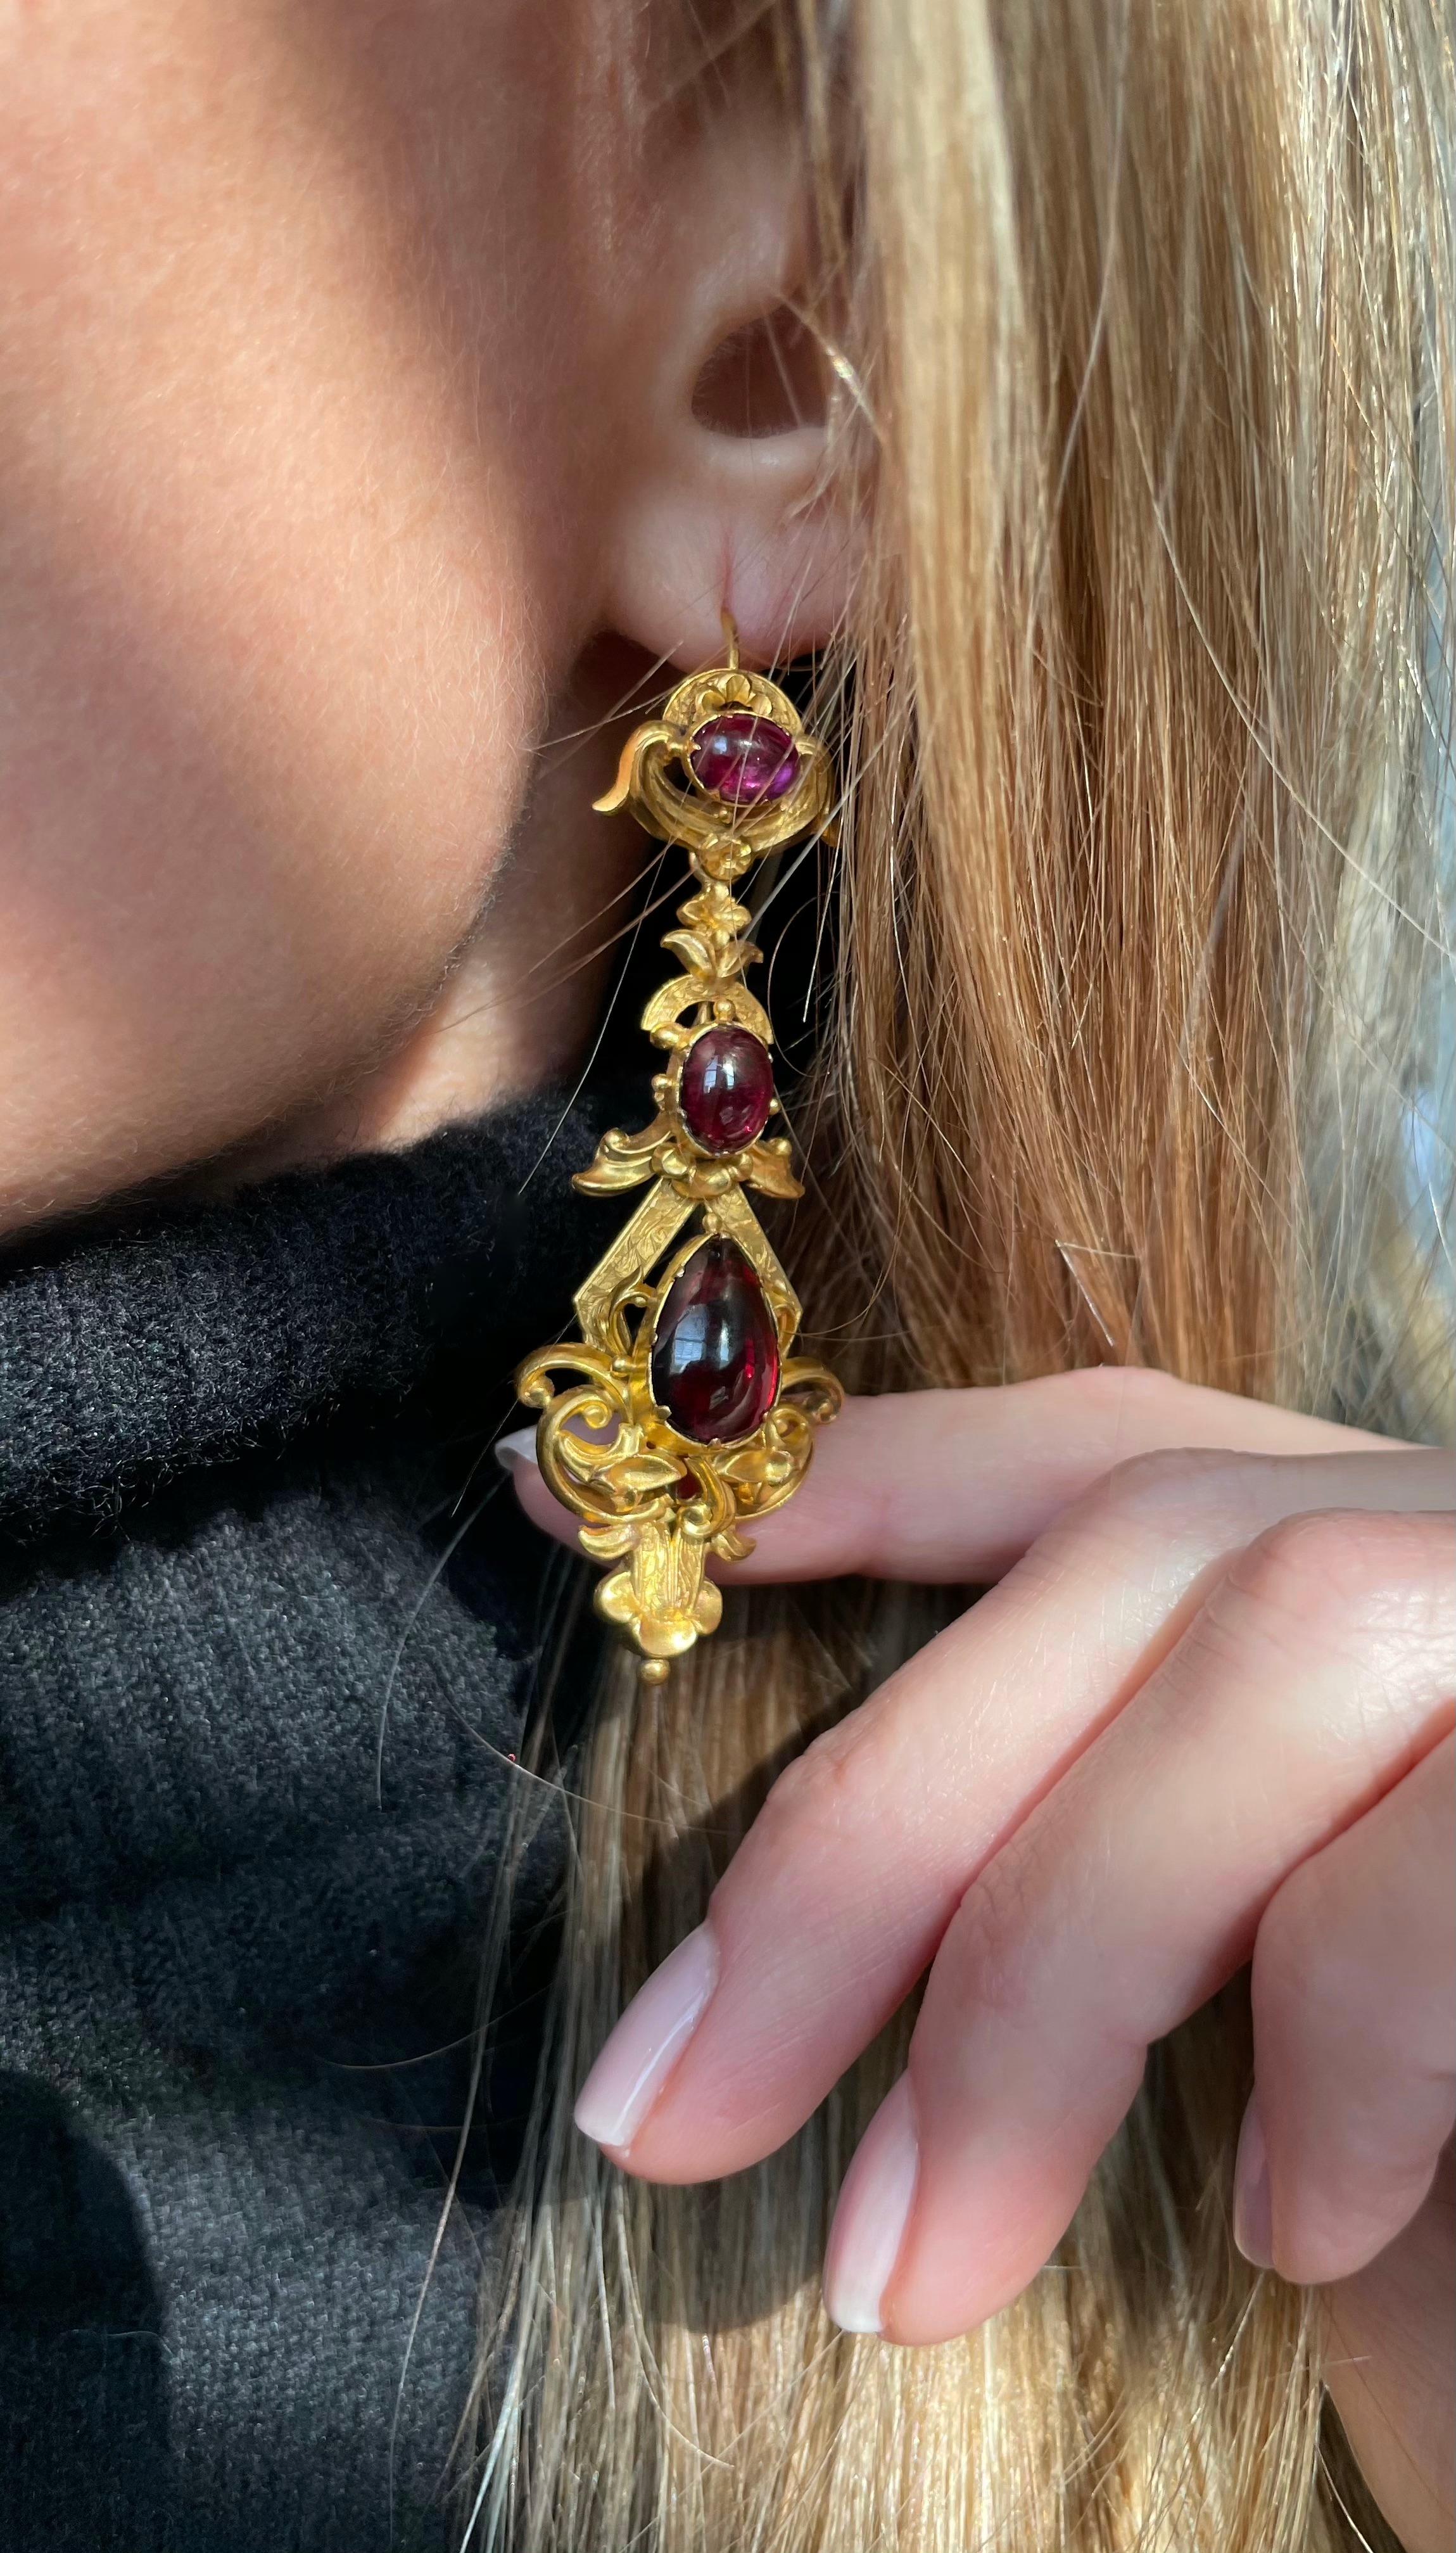 This delightful and incredibly scarce Georgian  demi-parure contains a matched suite of jewels, beautifully crafted in a bloomed 15k gold with glowing, foil backed almandine garnet carbuncles. The back of the stomacher contains a small glass covered